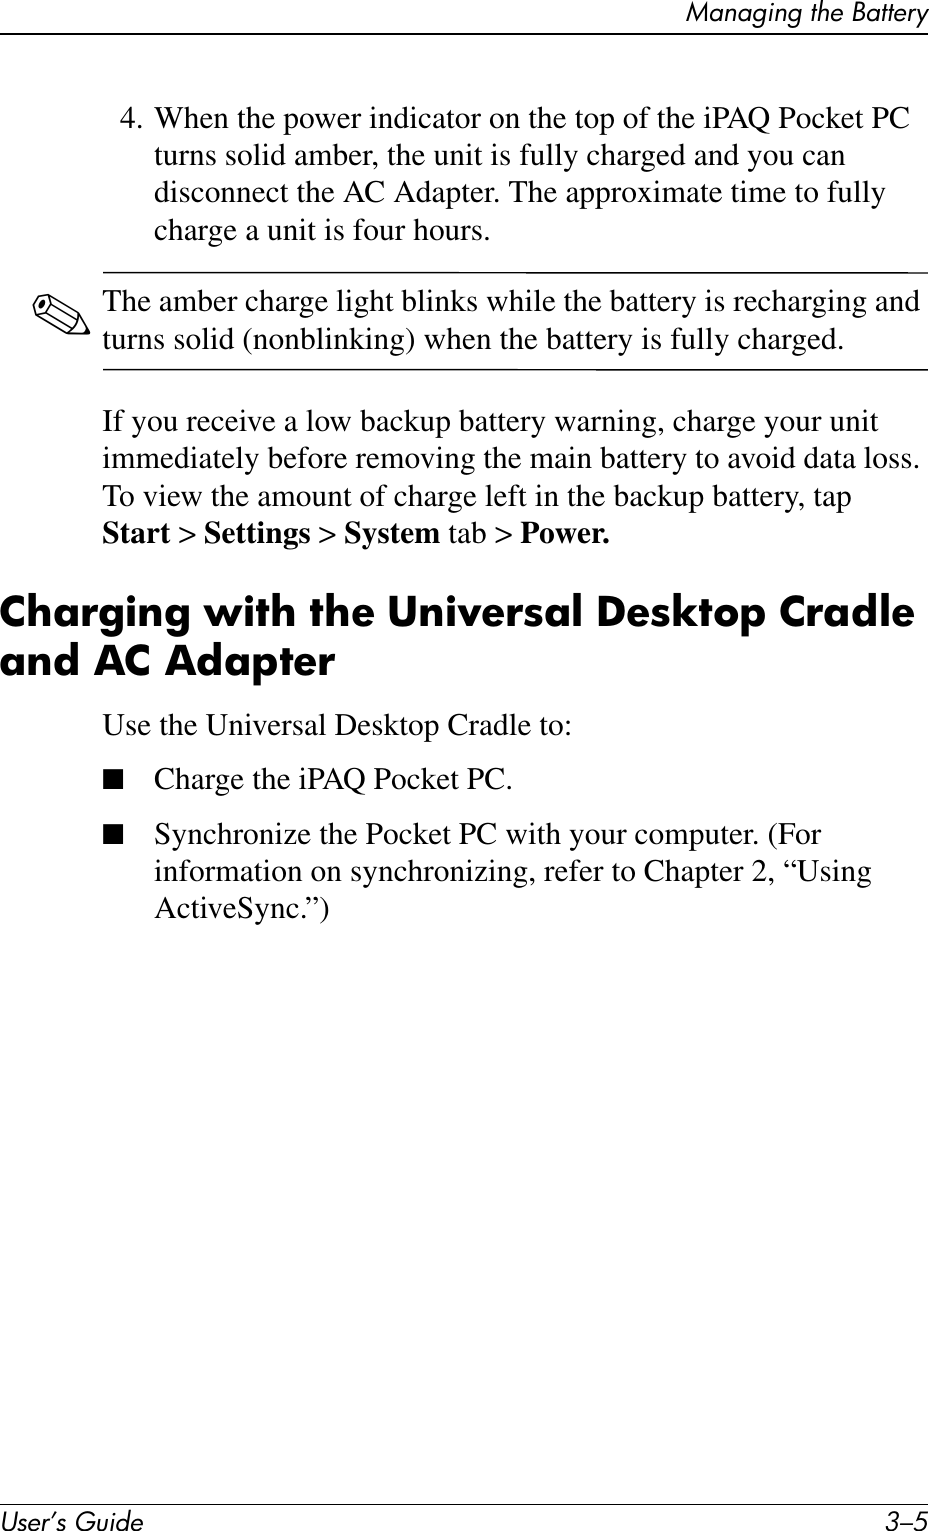 Managing the BatteryUser’s Guide 3–54. When the power indicator on the top of the iPAQ Pocket PC turns solid amber, the unit is fully charged and you can disconnect the AC Adapter. The approximate time to fully charge a unit is four hours.✎The amber charge light blinks while the battery is recharging and turns solid (nonblinking) when the battery is fully charged.If you receive a low backup battery warning, charge your unit immediately before removing the main battery to avoid data loss. To view the amount of charge left in the backup battery, tap Start &gt; Settings &gt; System tab &gt; Power.Charging with the Universal Desktop Cradle and AC AdapterUse the Universal Desktop Cradle to:■Charge the iPAQ Pocket PC.■Synchronize the Pocket PC with your computer. (For information on synchronizing, refer to Chapter 2, “Using ActiveSync.”)